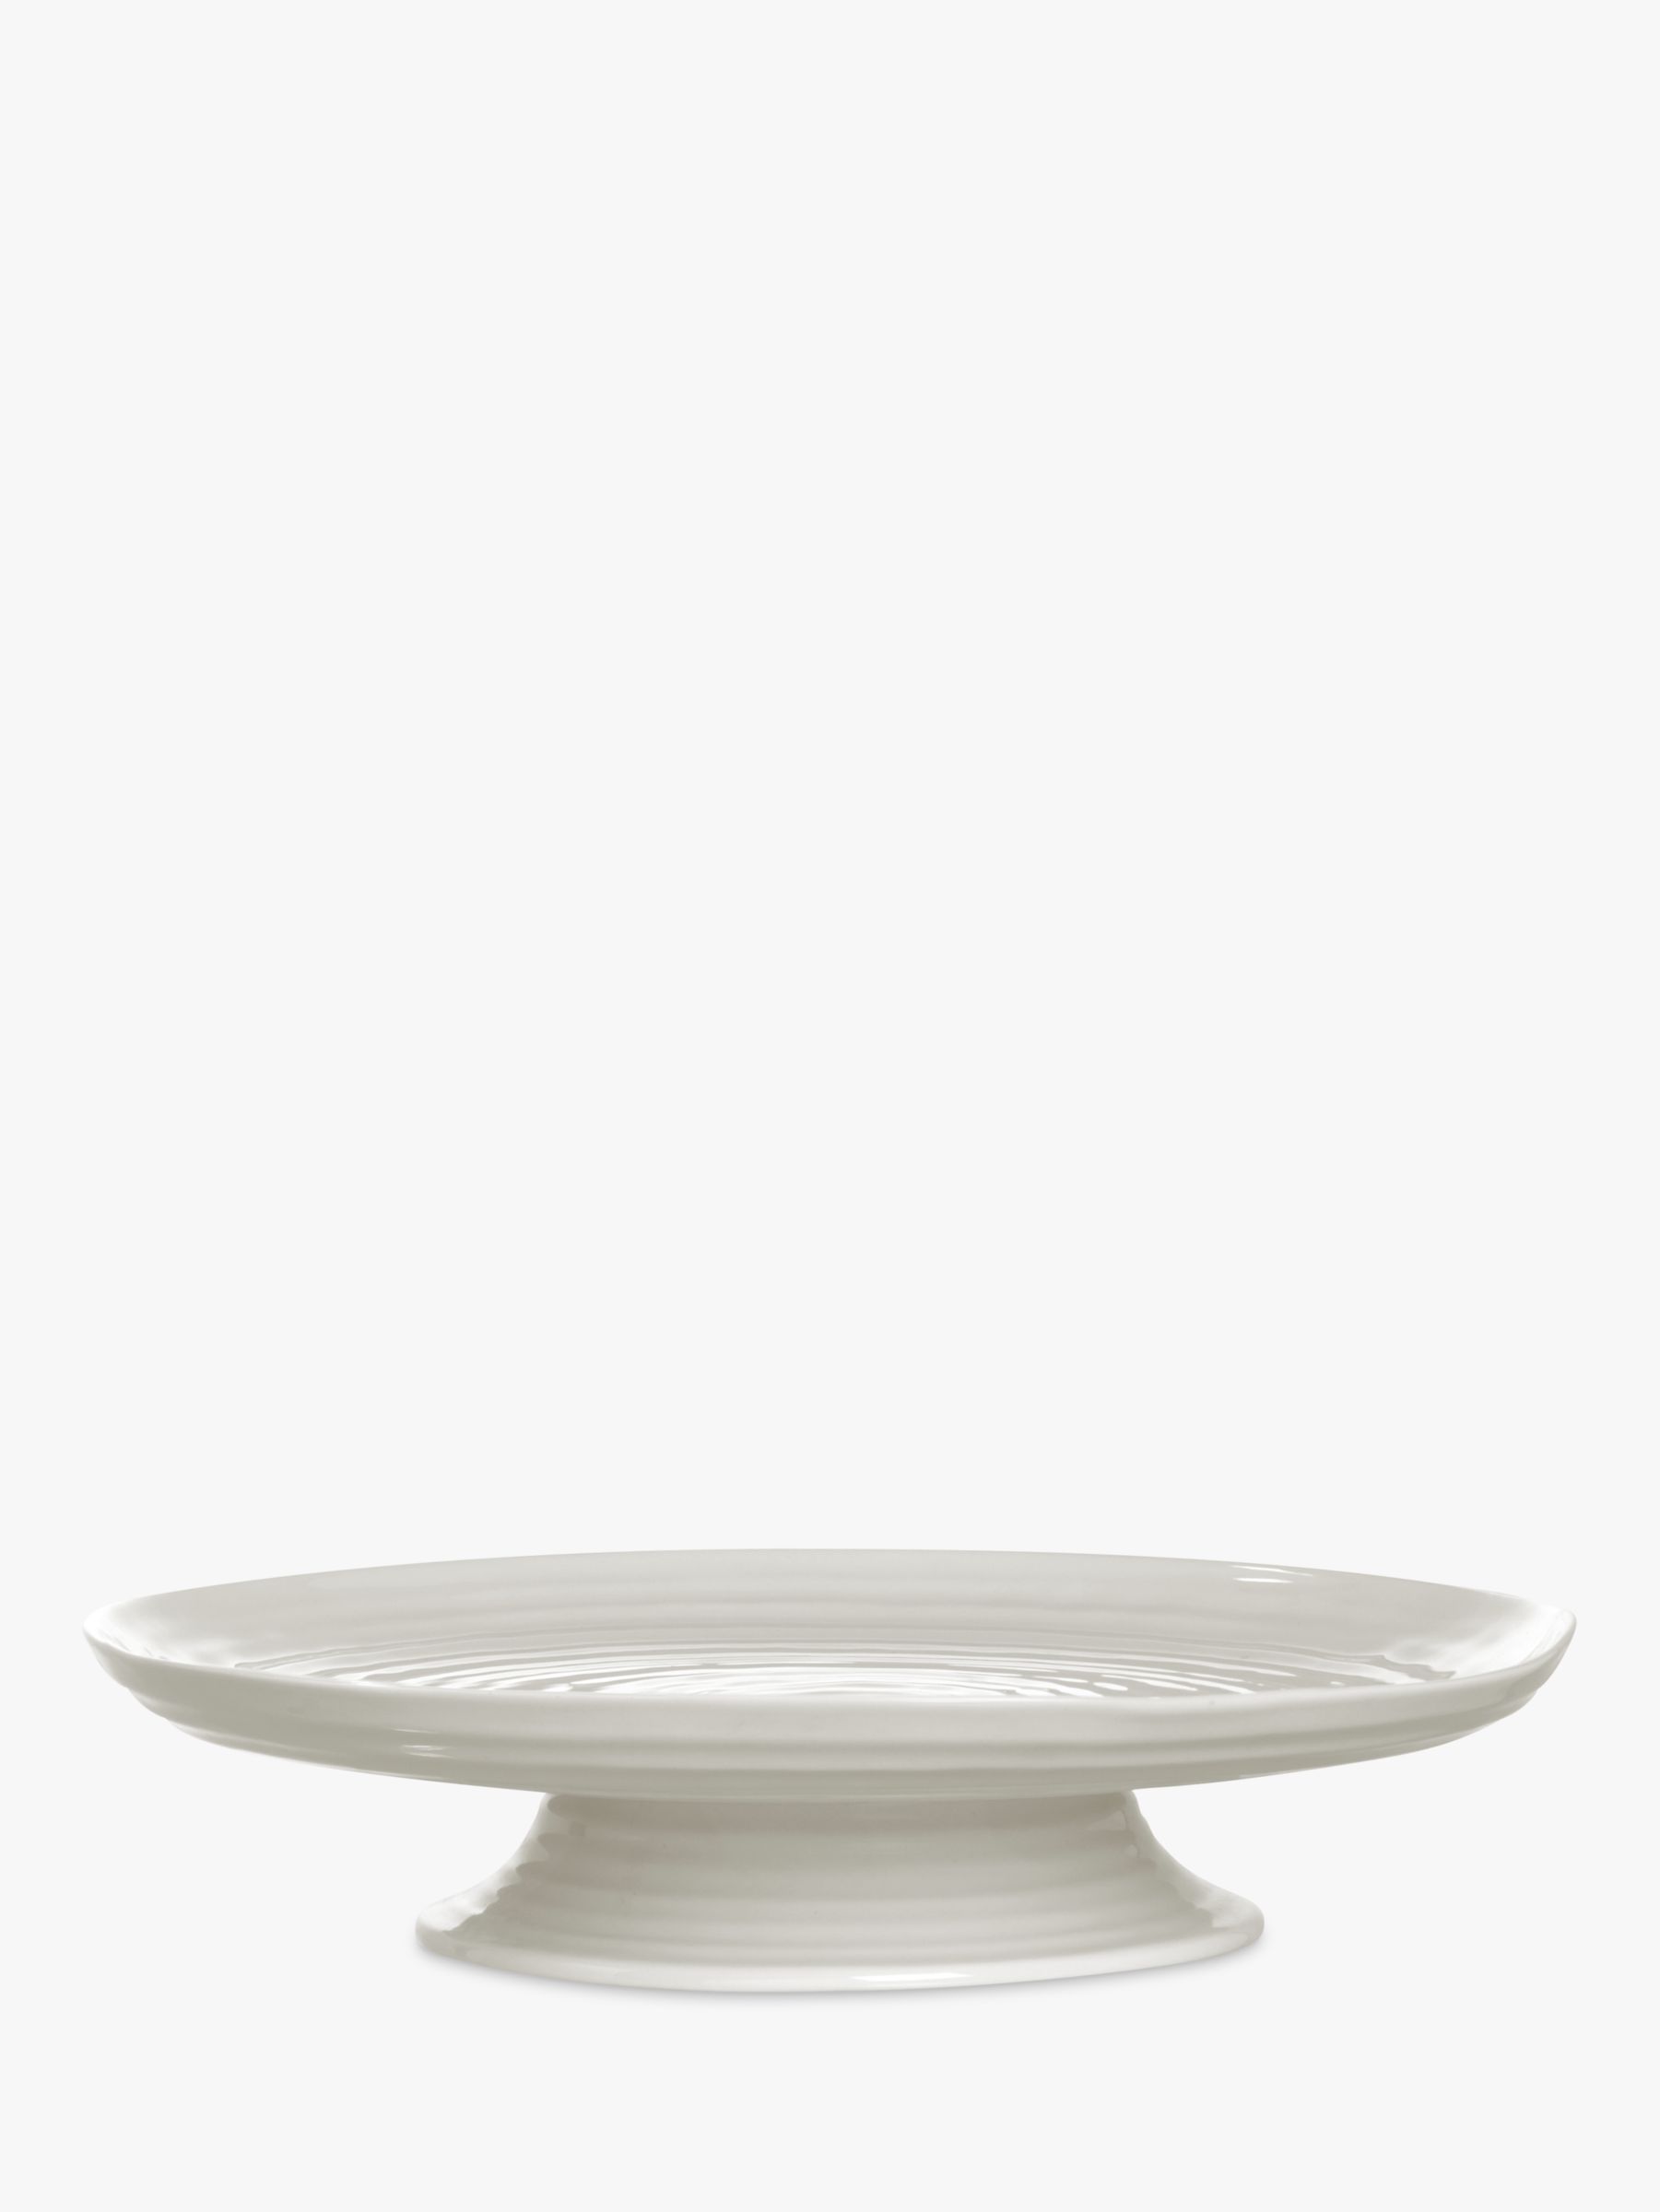 Sophie Conran for Portmeirion Footed Cake Plate,